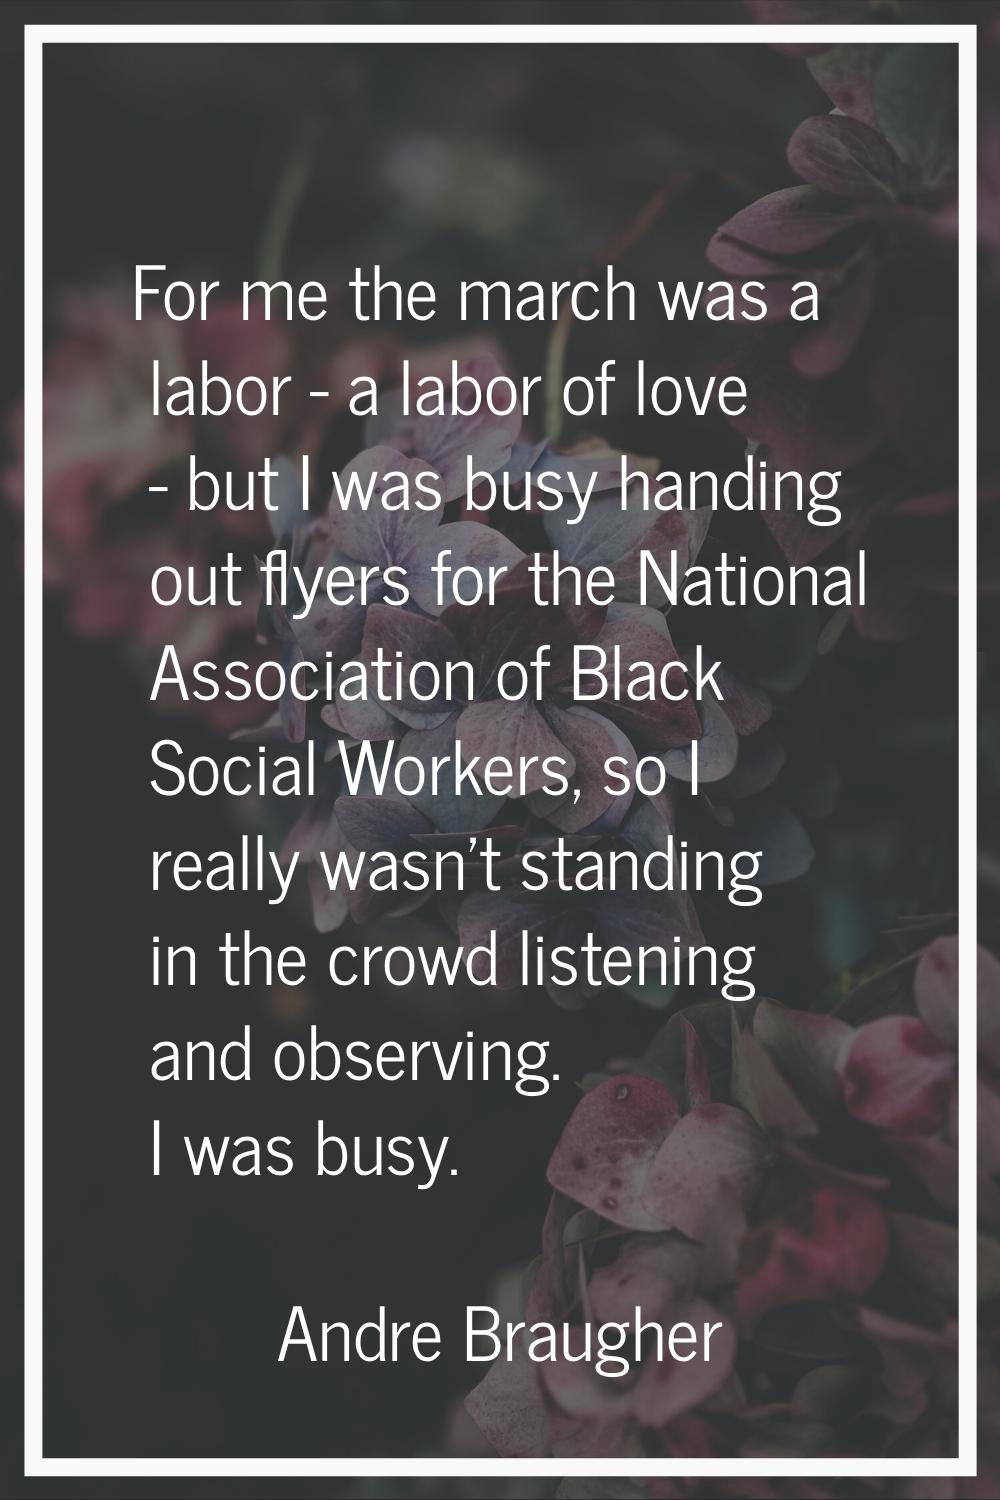 For me the march was a labor - a labor of love - but I was busy handing out flyers for the National